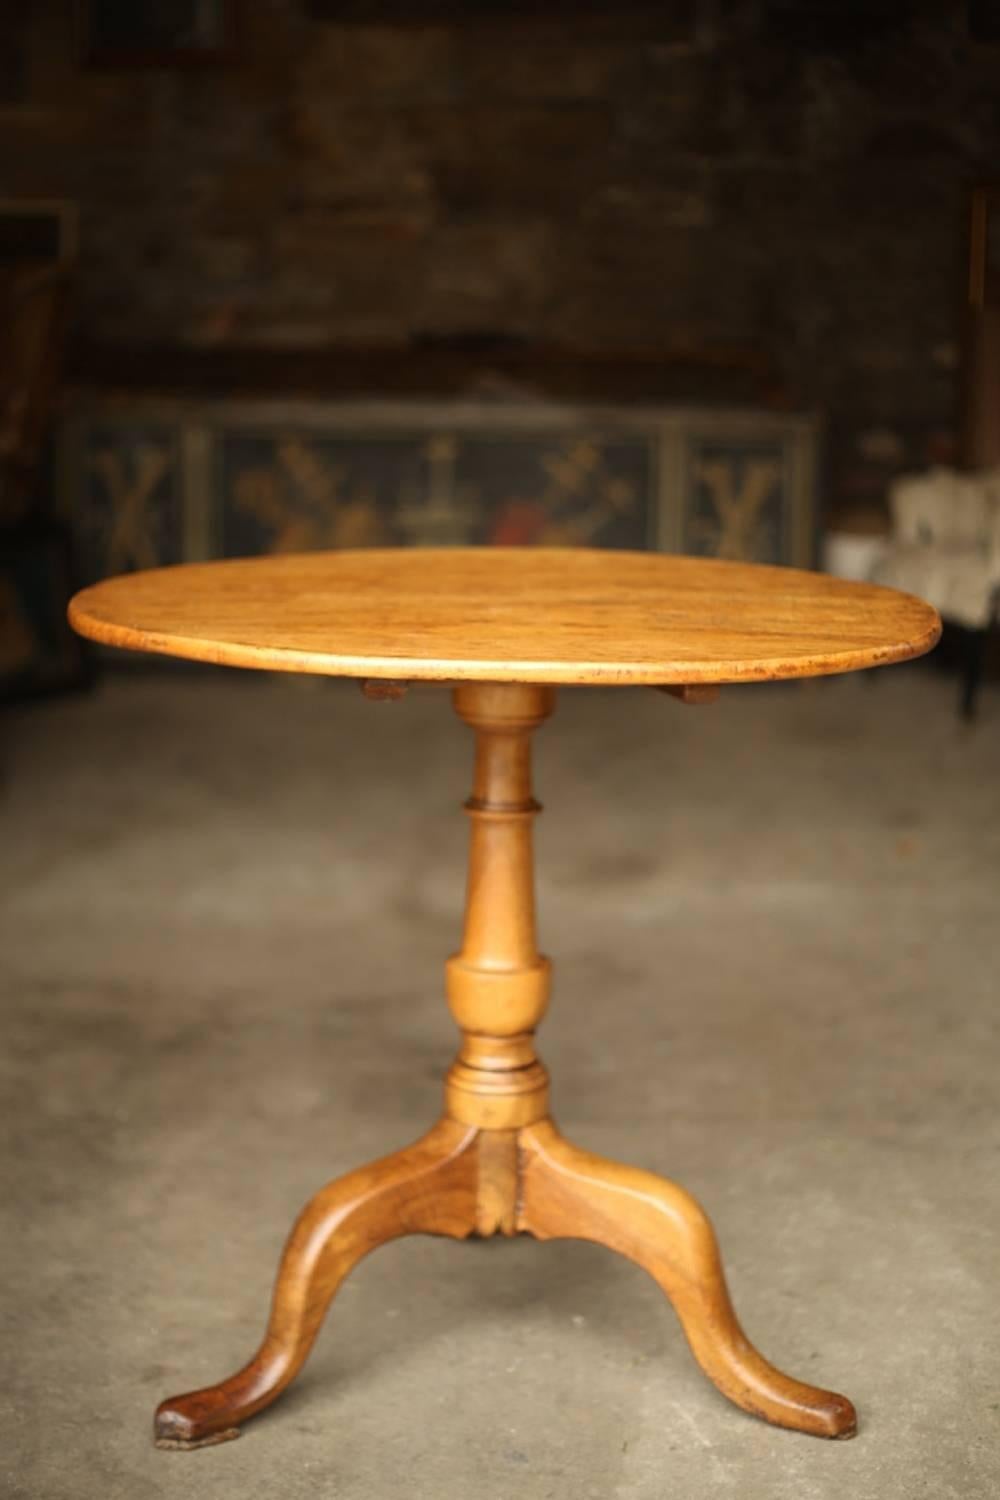 This is a very smart late 18th century burr elm tilt top table. It is the most amazing color with fabulous patina and superb grain. The quality is very high with no serious damage just light wear. There is a piece of board tacked in to the side of